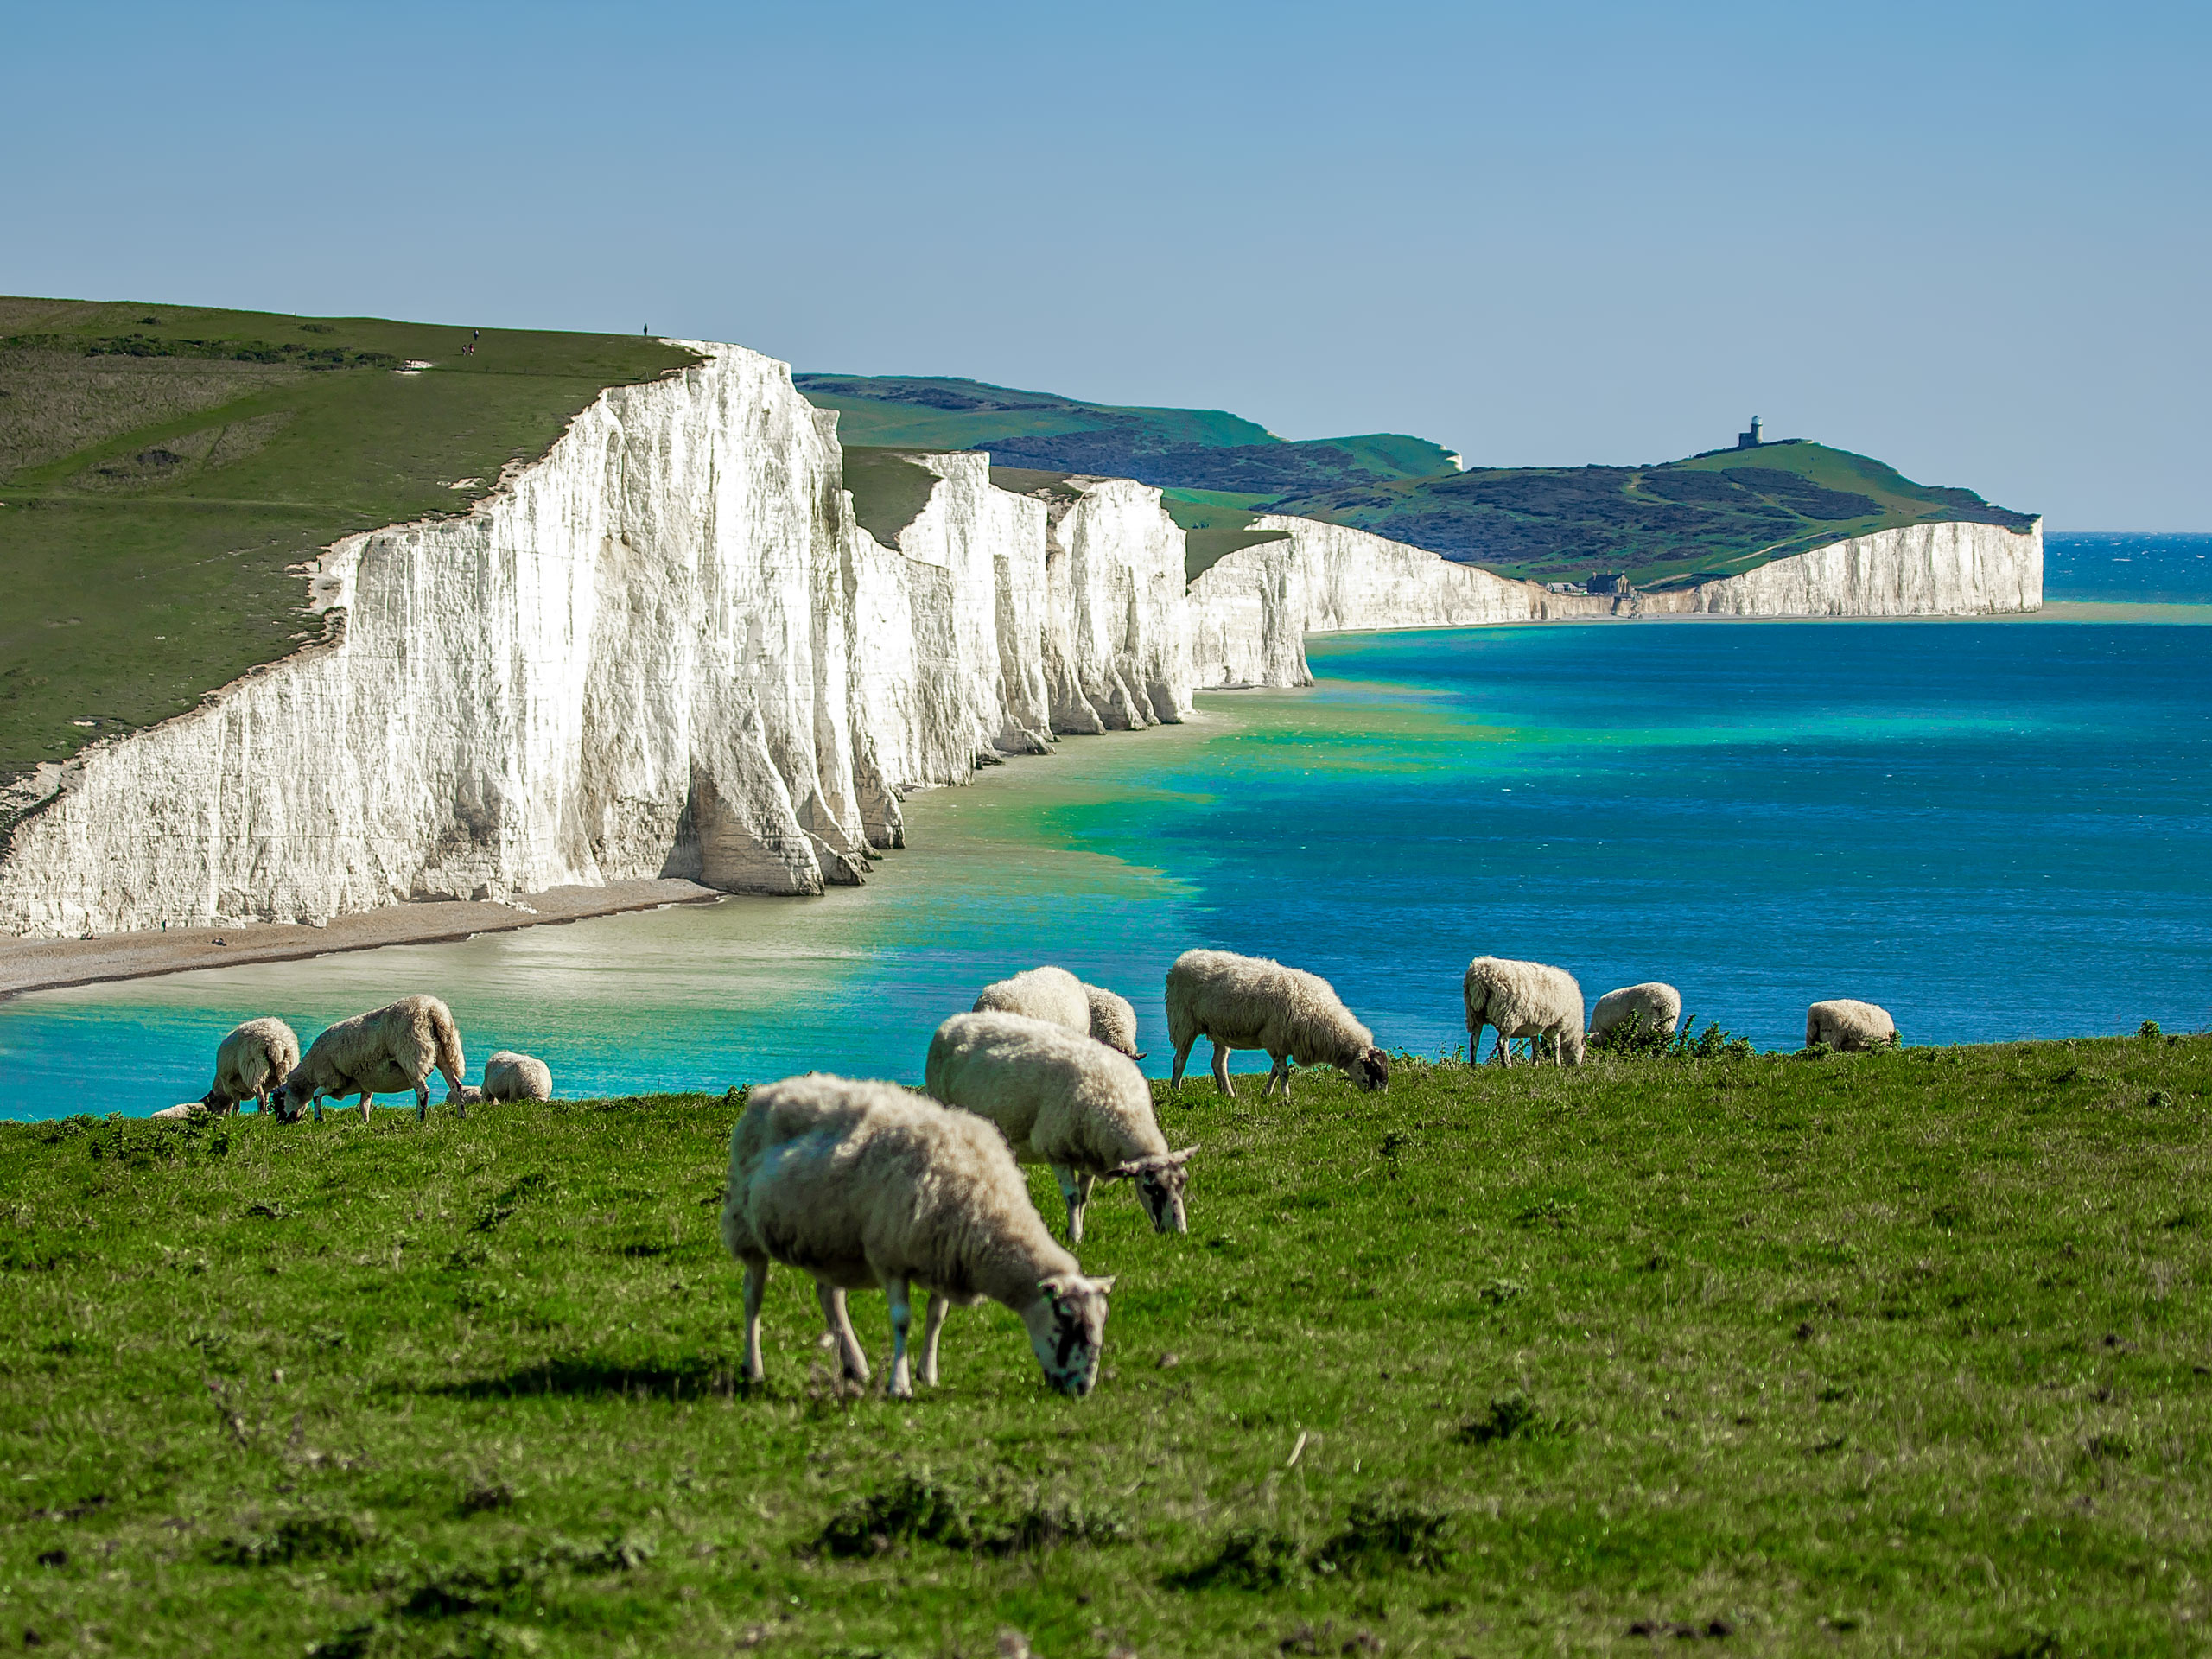 Sheep grazing in fields by stunning Seven Sisters cliffs